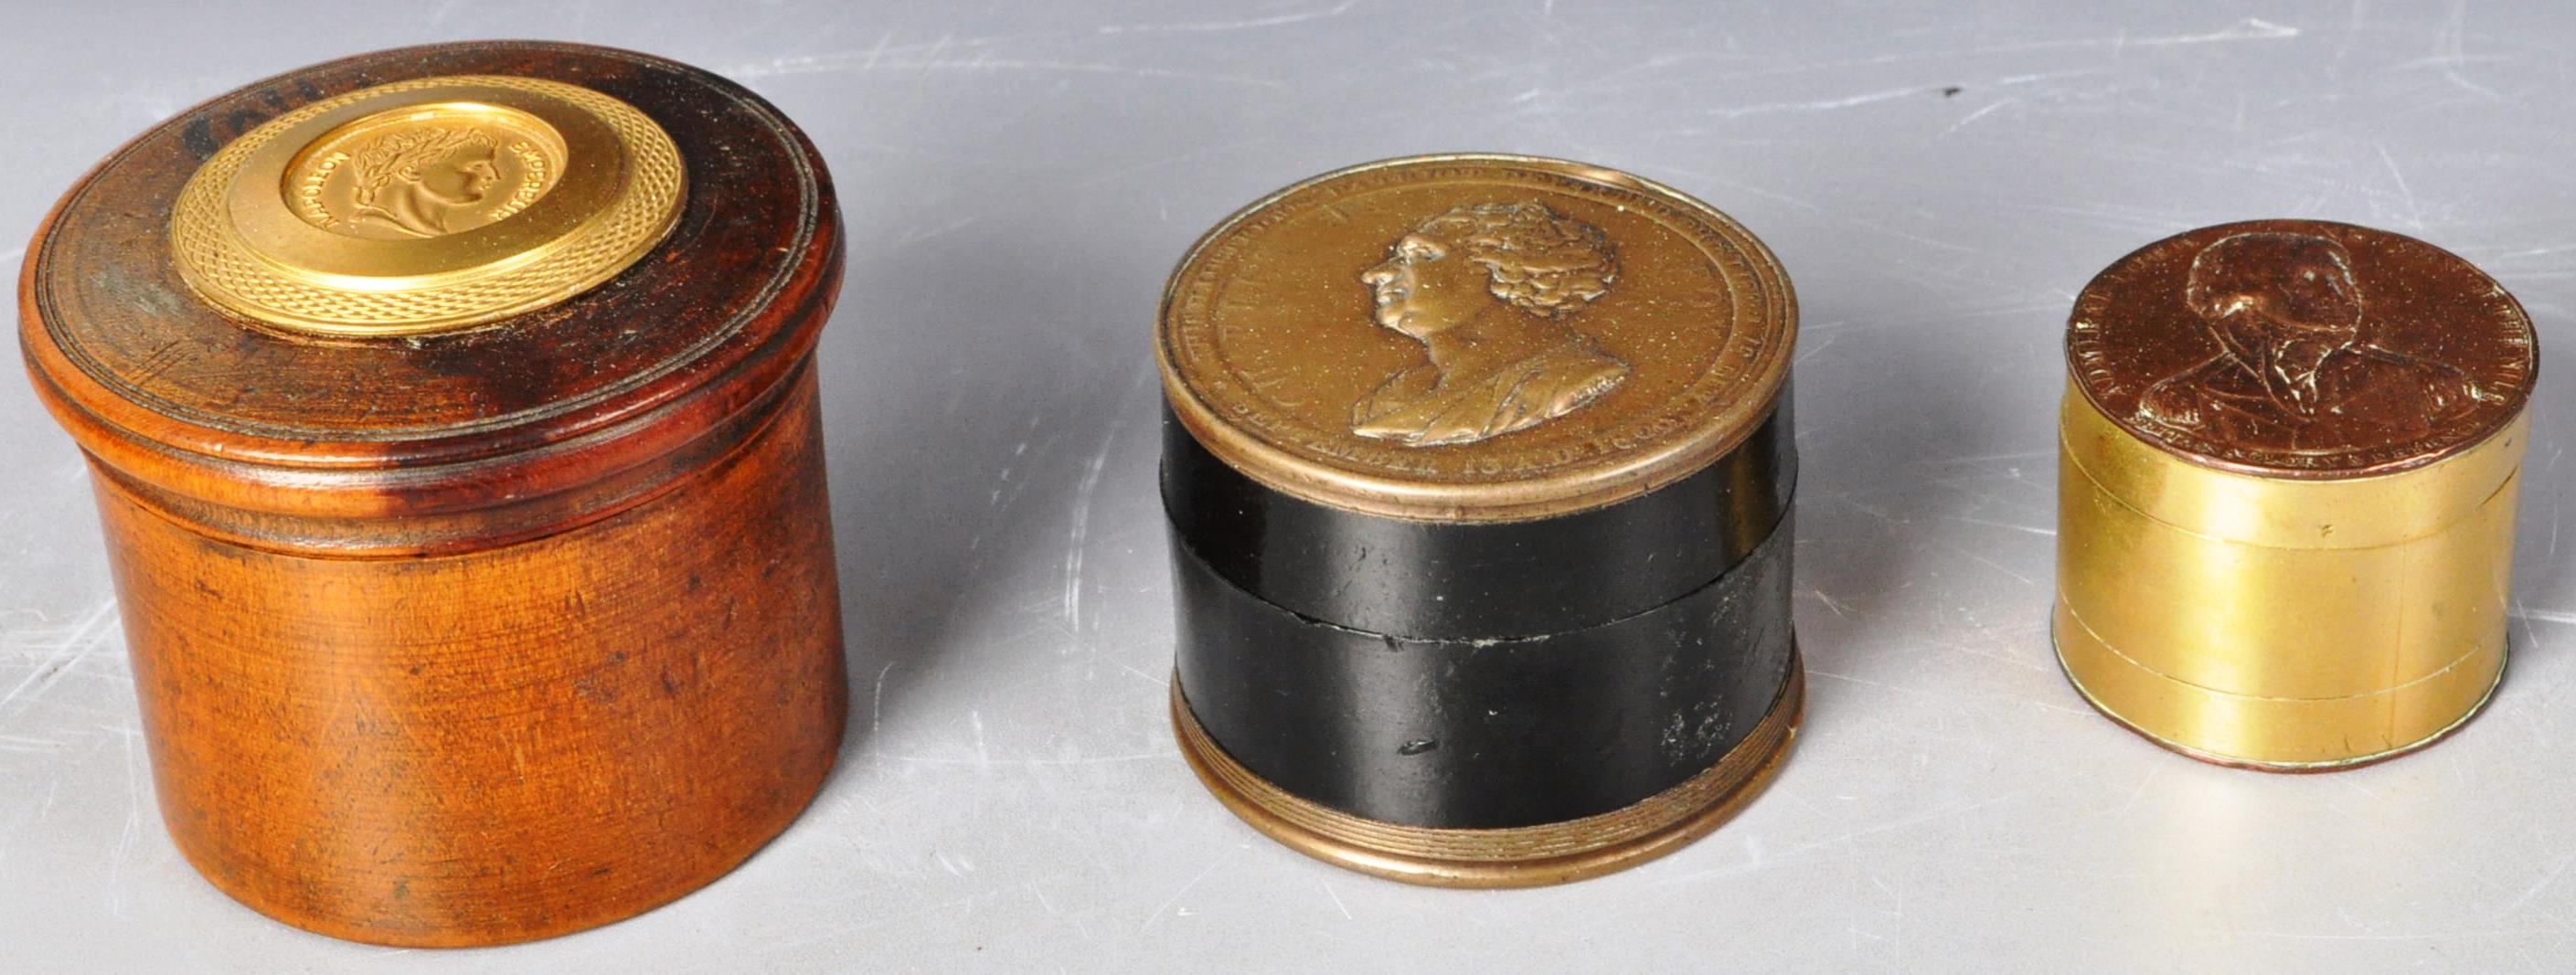 SELECTION OF THREE 19TH CENTURY VICTORIAN PILL POTS / BOXES - Image 3 of 9